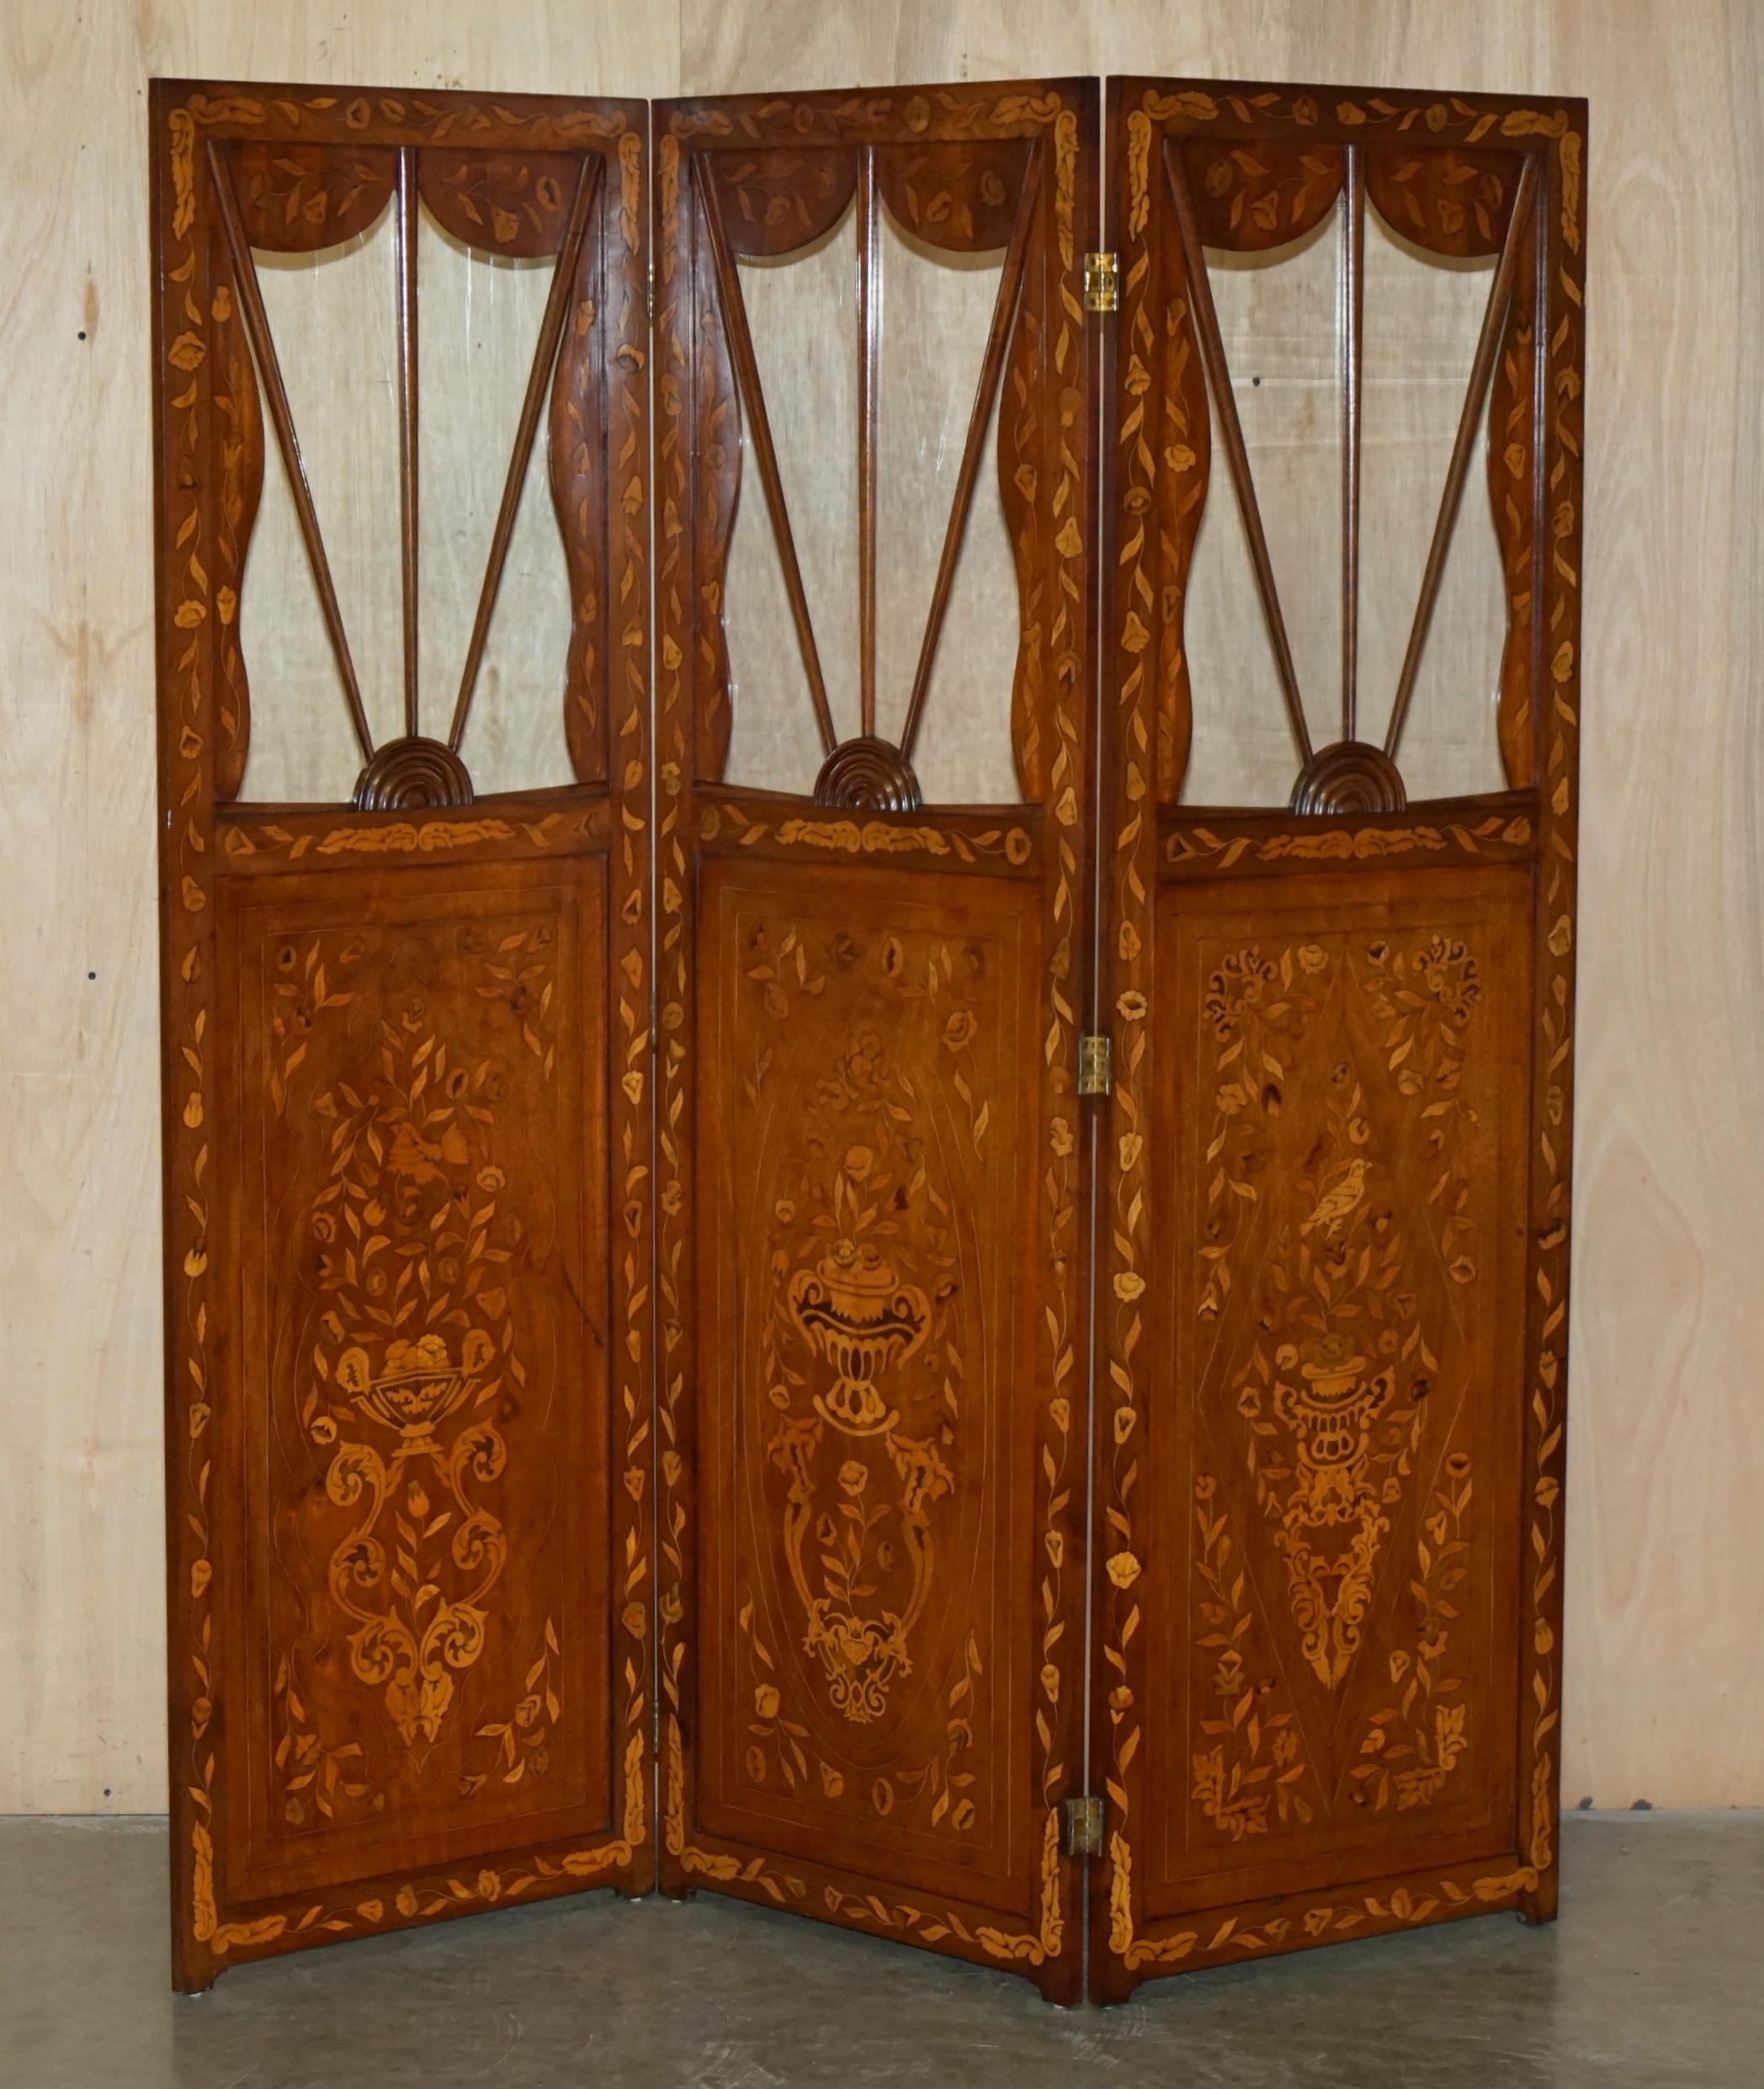 Royal House Antiques

Royal House Antiques is delighted to offer for sale this pair of absolutely stunning, finest quality, Antique Dutch Mahogany & Walnut three fold room dividers with glass panel tops and dual action hinges

Please note the